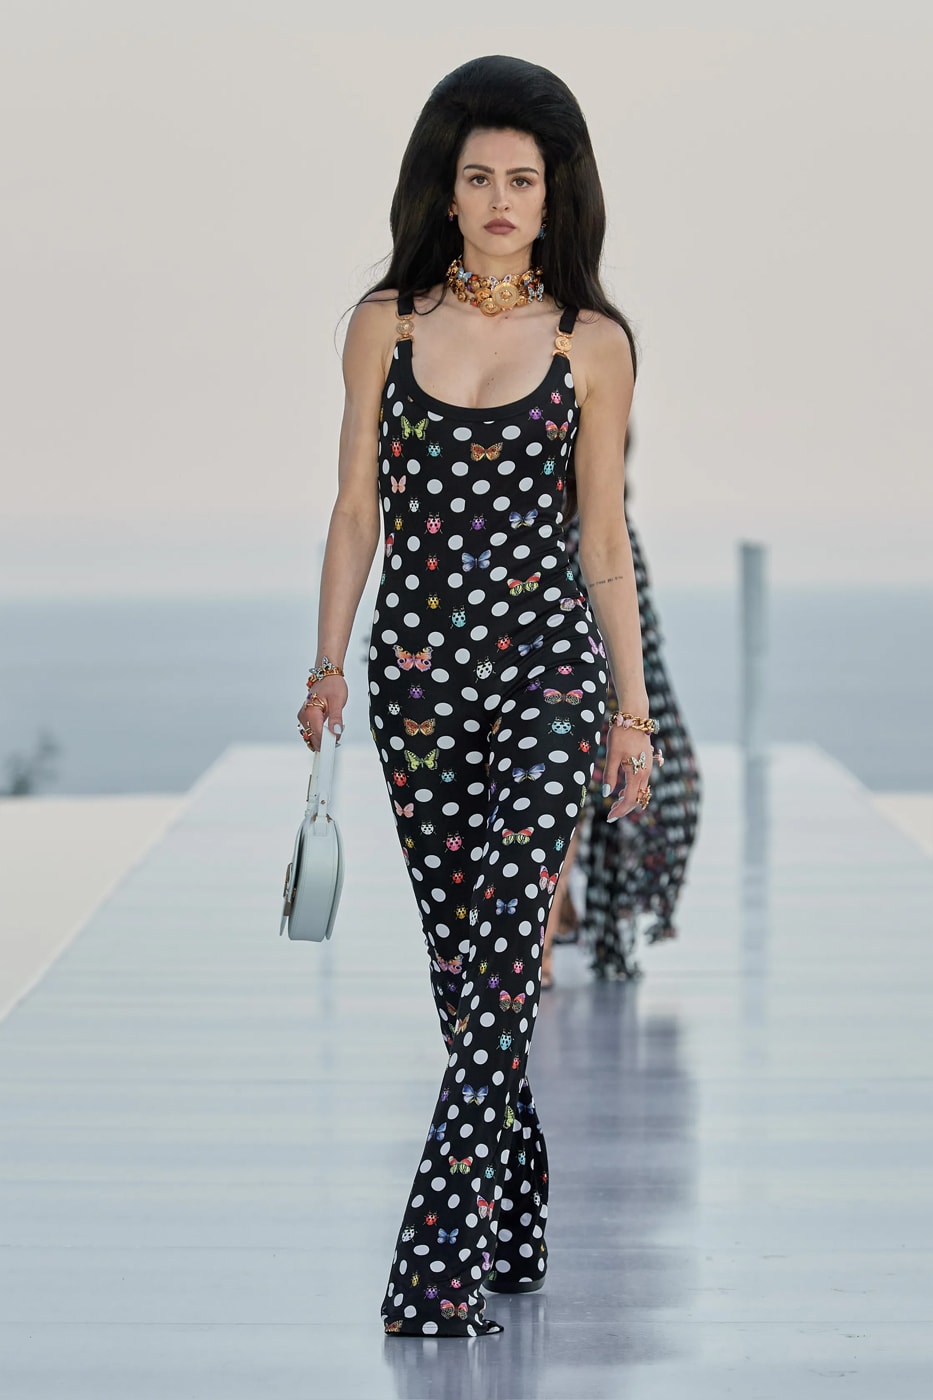 The Dua Lipa X Versace Pre-Fall 2023 Collection Is Nothing Short of Glamorous cannes france south of france donatella versace medusa la vacanza vacation glamor polka dots butterfly